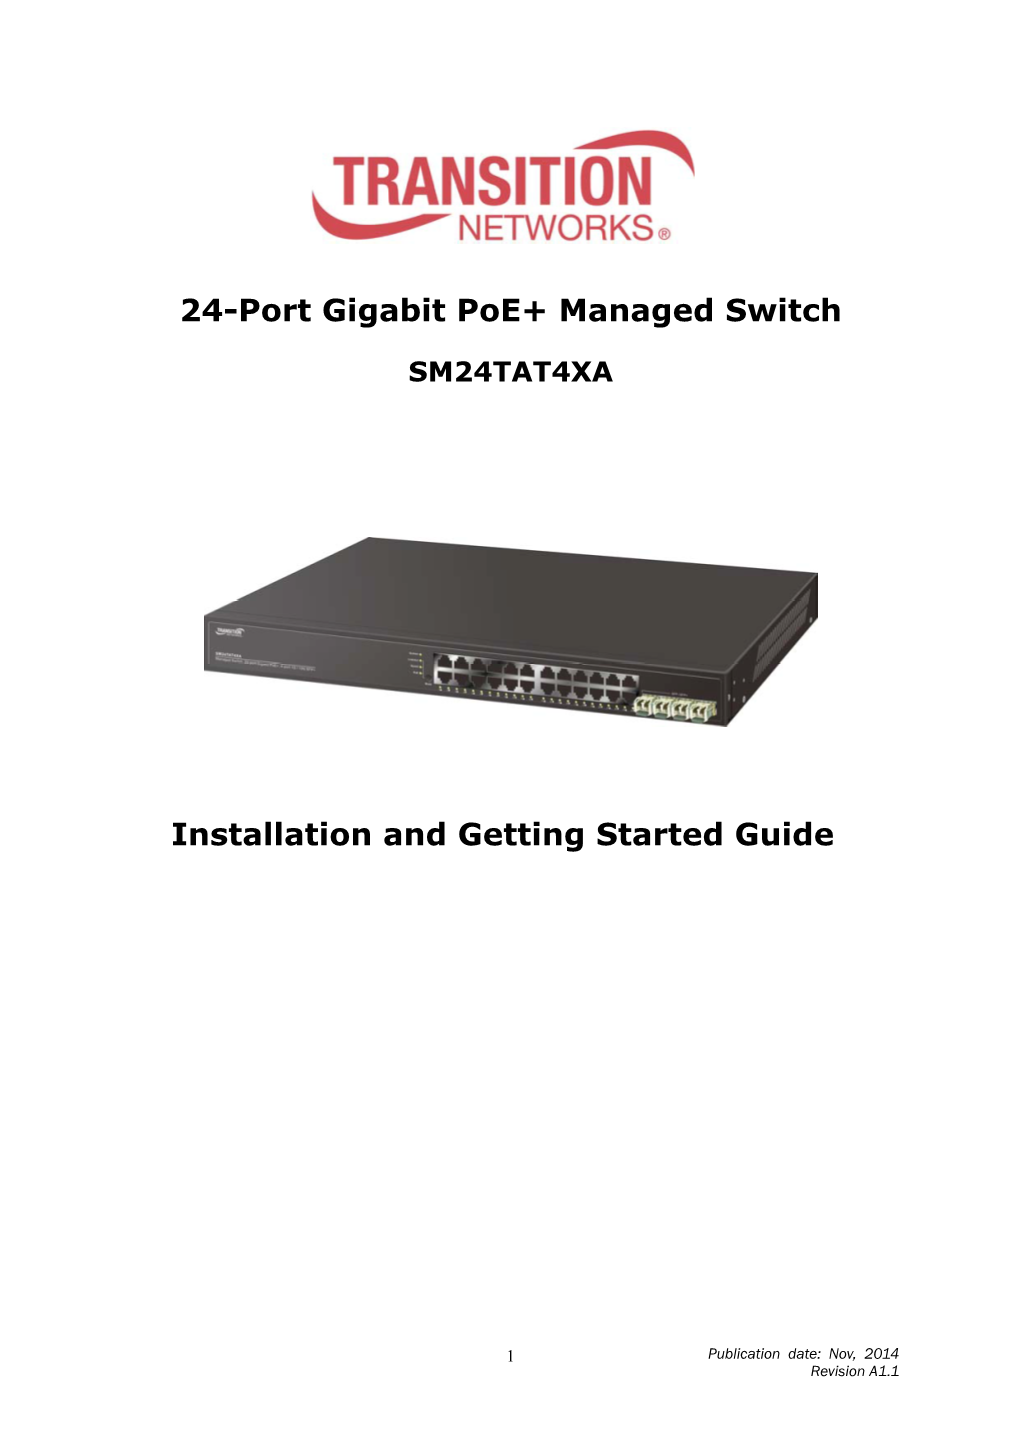 24-Port Gigabit Poe+ Managed Switch Installation and Getting Started Guide